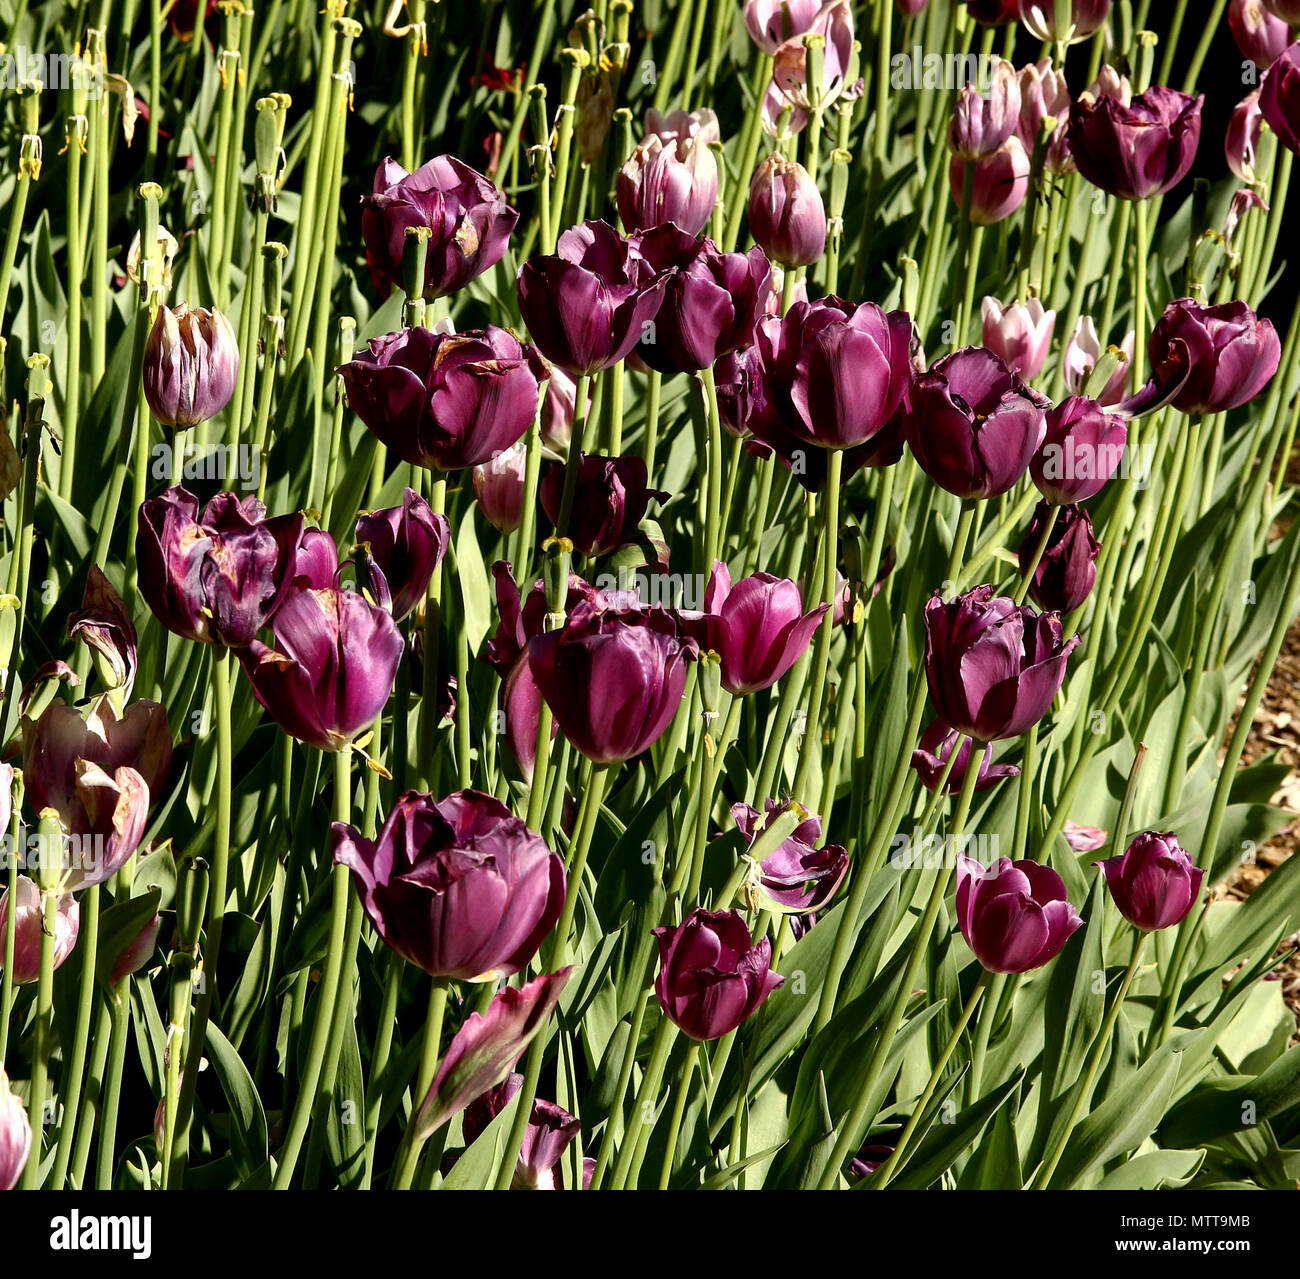 Purple tulips with green stems Stock Photo